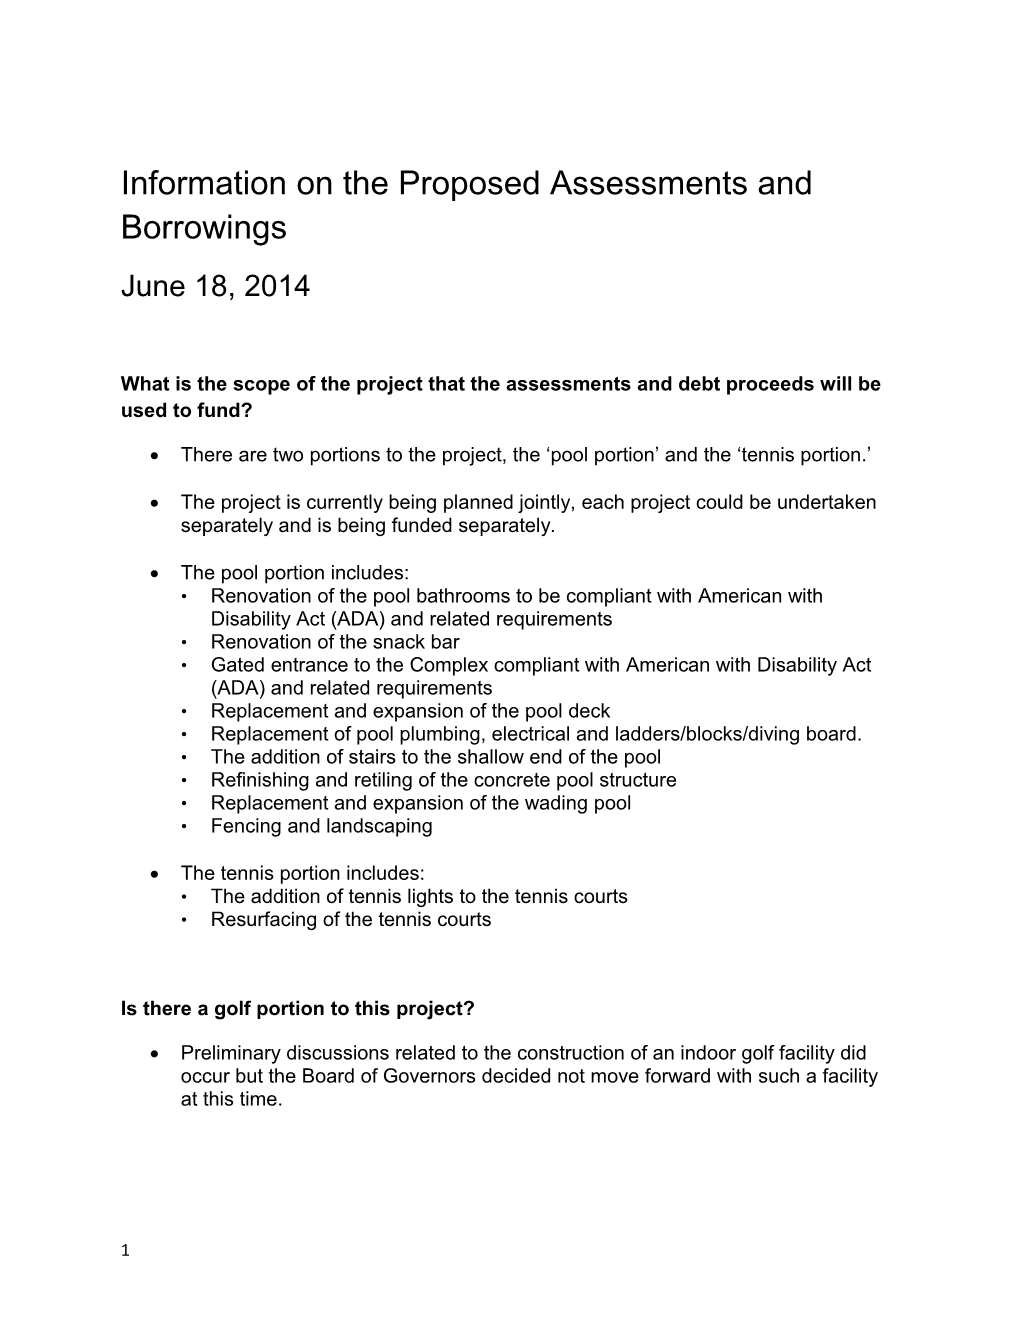 Information on the Proposed Assessments and Borrowings